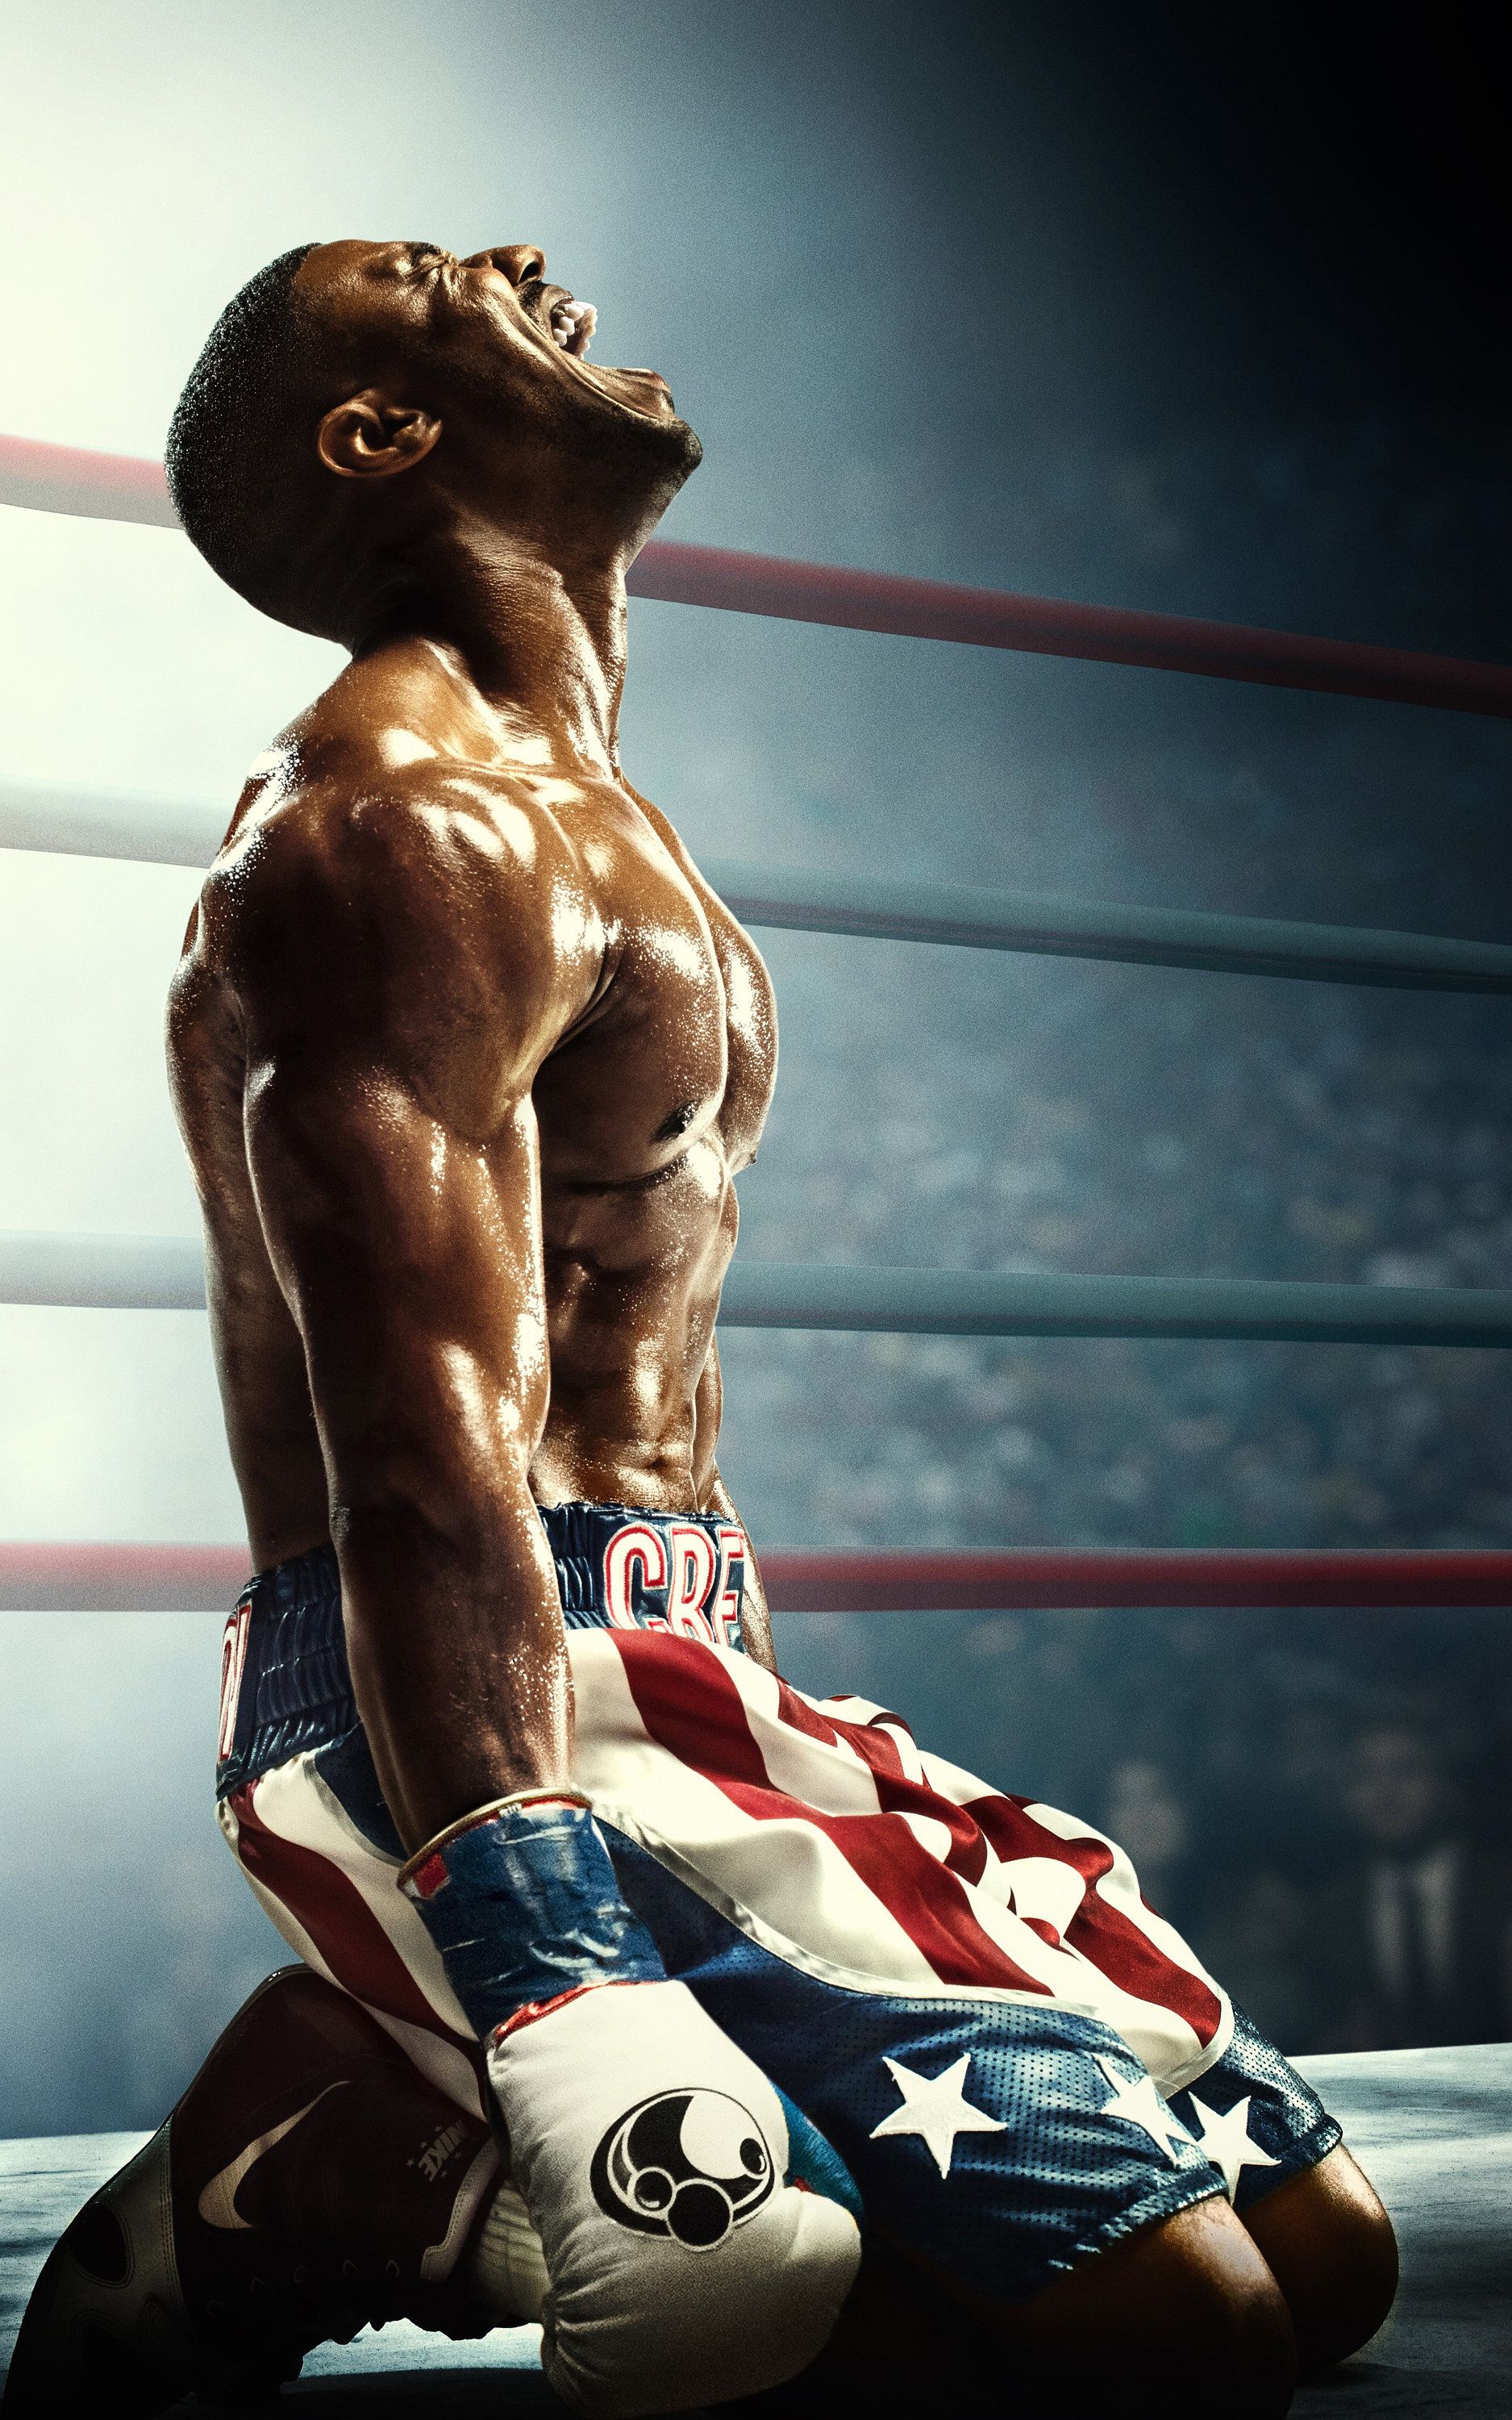 Creed Boxing Wallpaper Free Creed Boxing Background